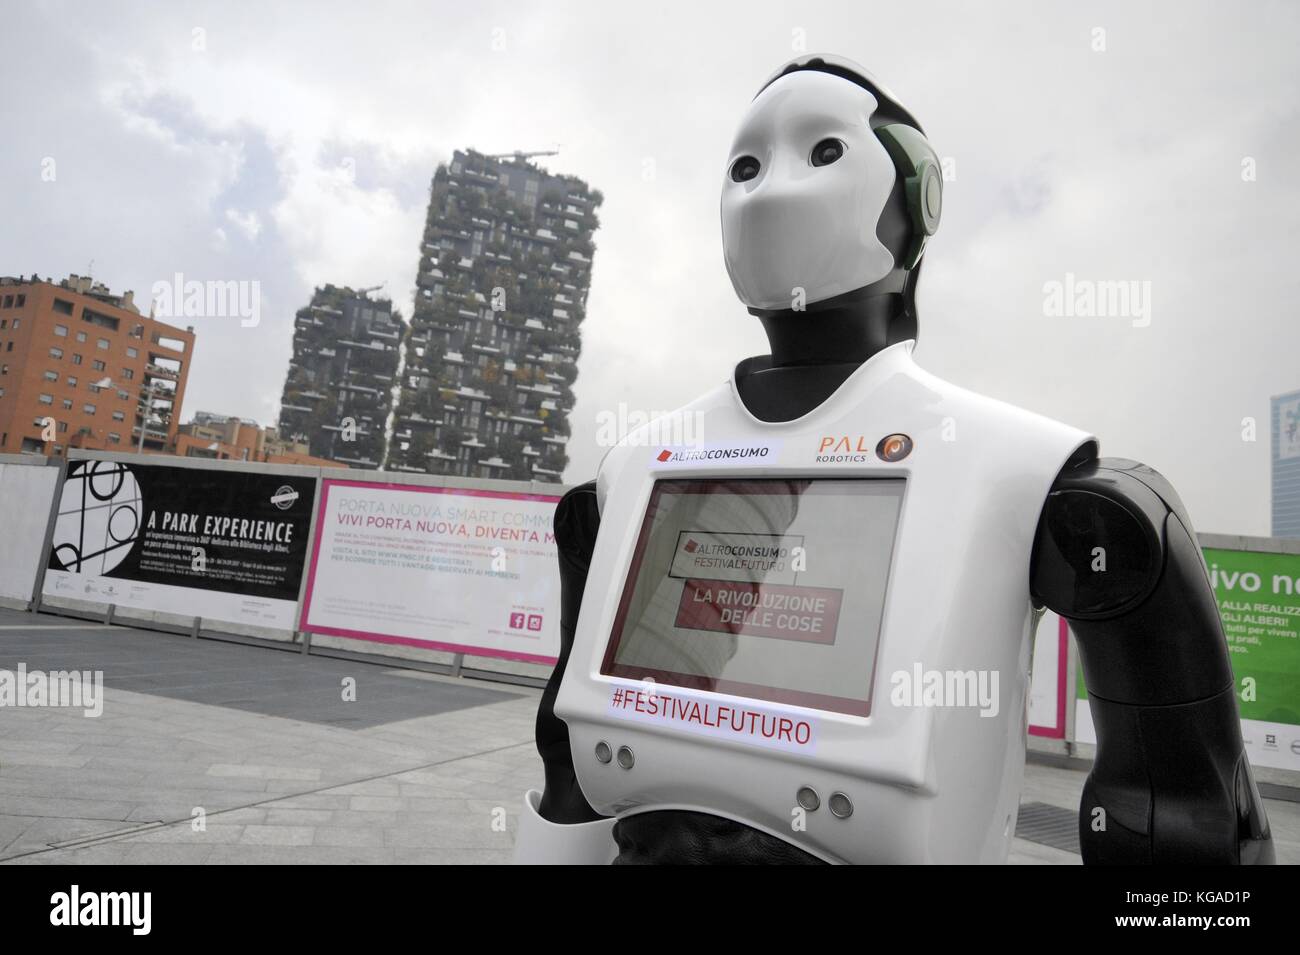 Milan (Italy), November 2017; for a few days the interactive robot Reem has moved to various places in the city to promote an event organized by the consumer association Altroconsumo dedicated to new technologies and innovation. Reem is realized by PAL Robotics in Barcelona, a company specialized in the production of humanoid robots, and is able to move autonomously in crowded environments and communicate with people. Stock Photo